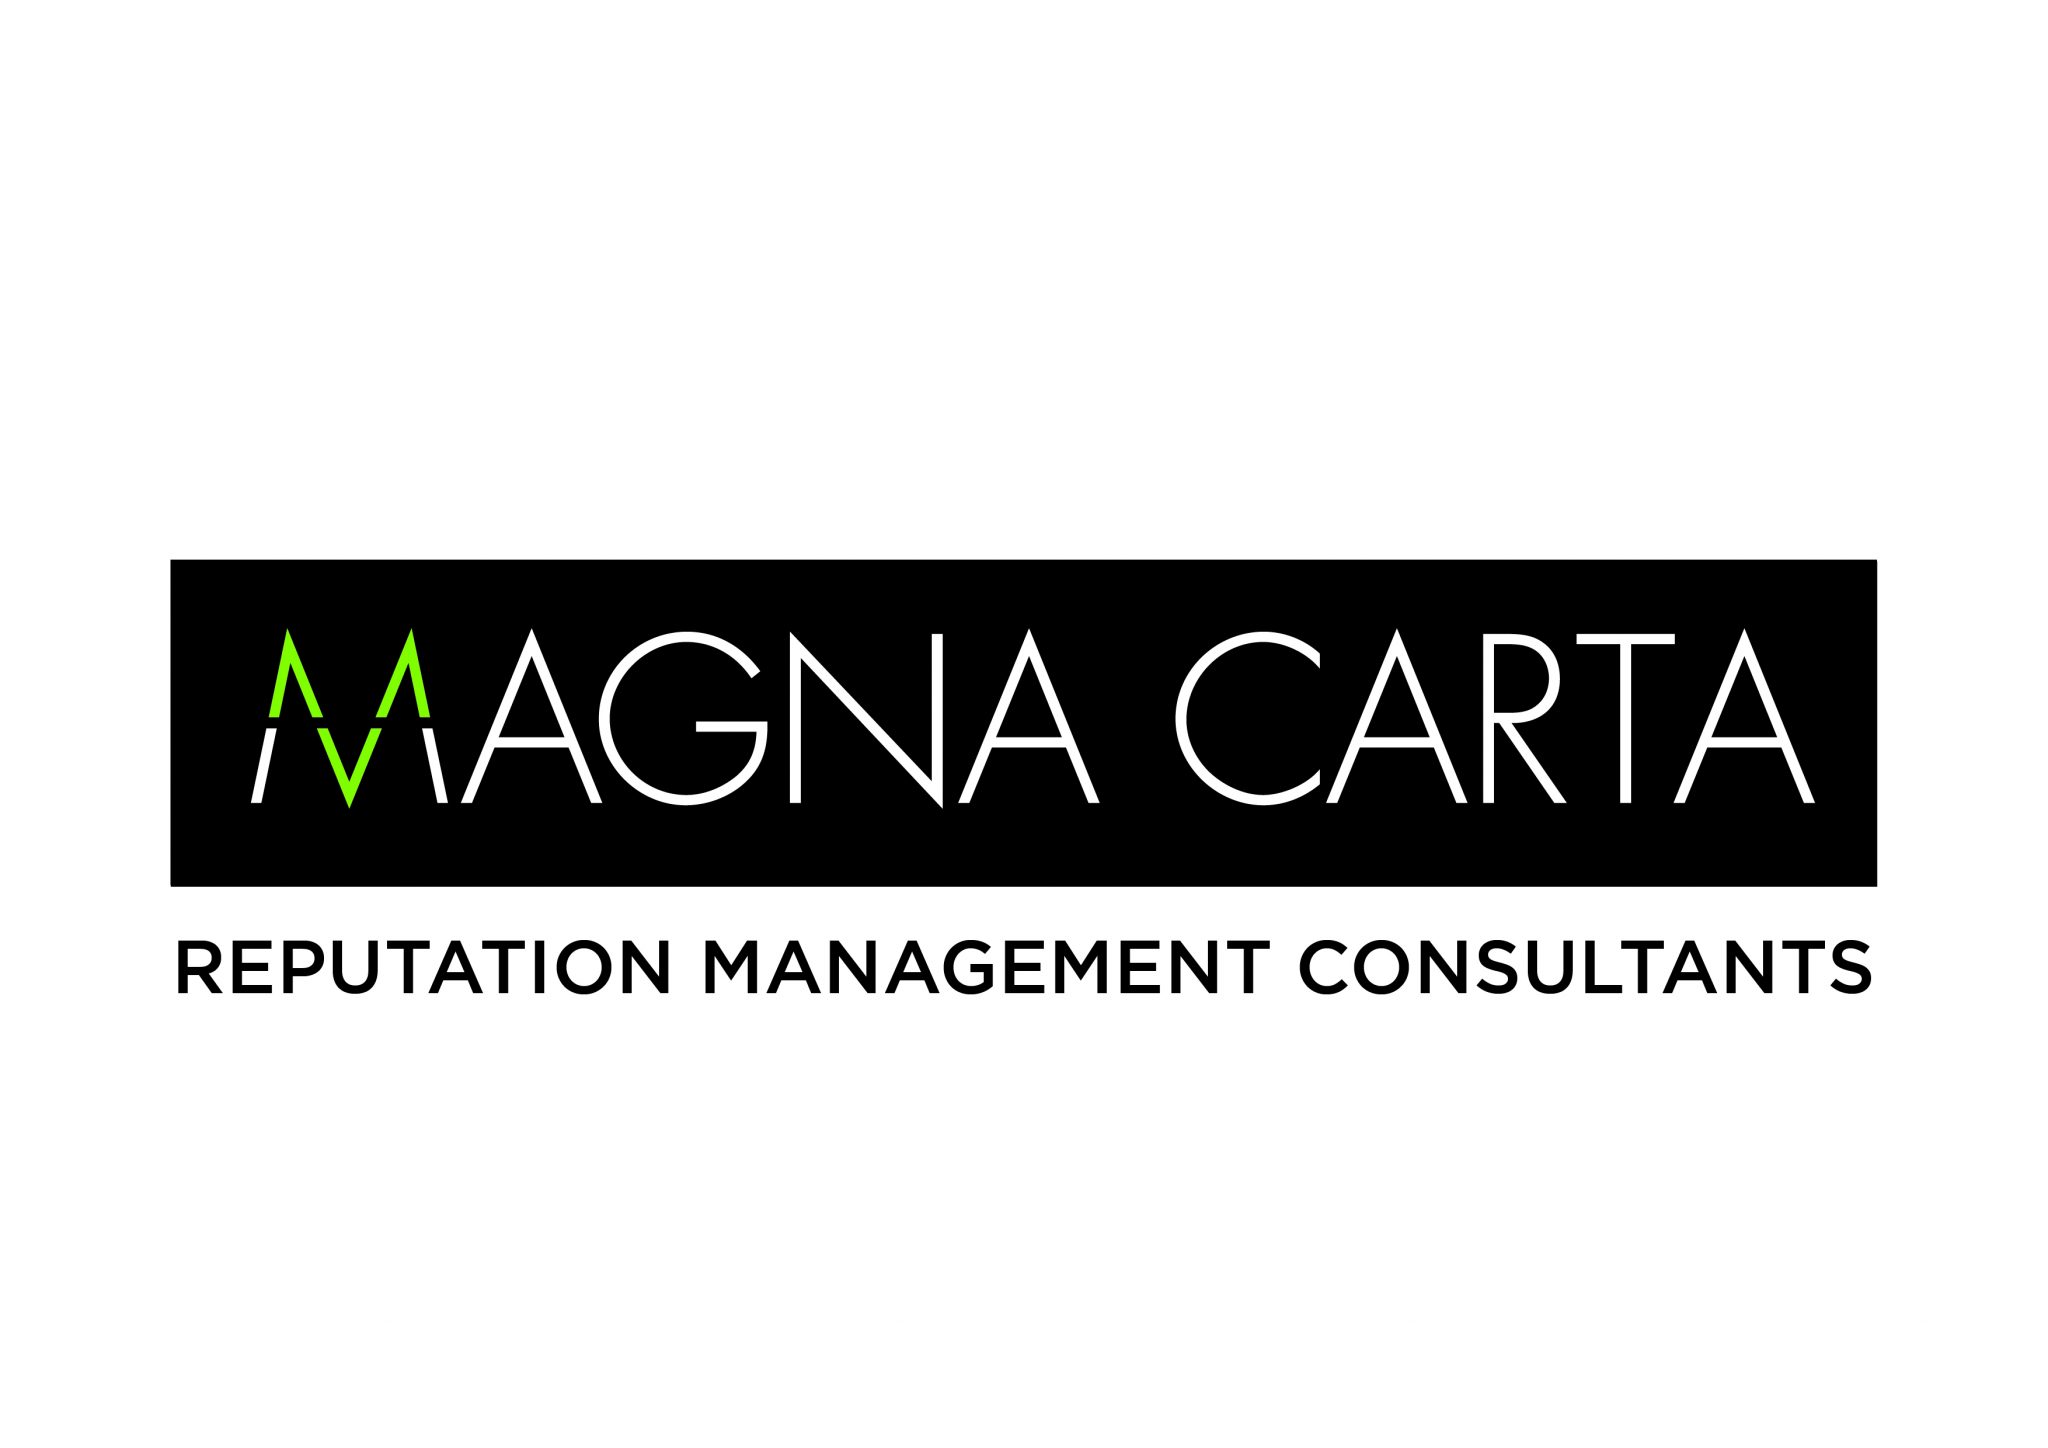 Reputation is a board-level concern and deserves the attention of the board says, Magna Carta